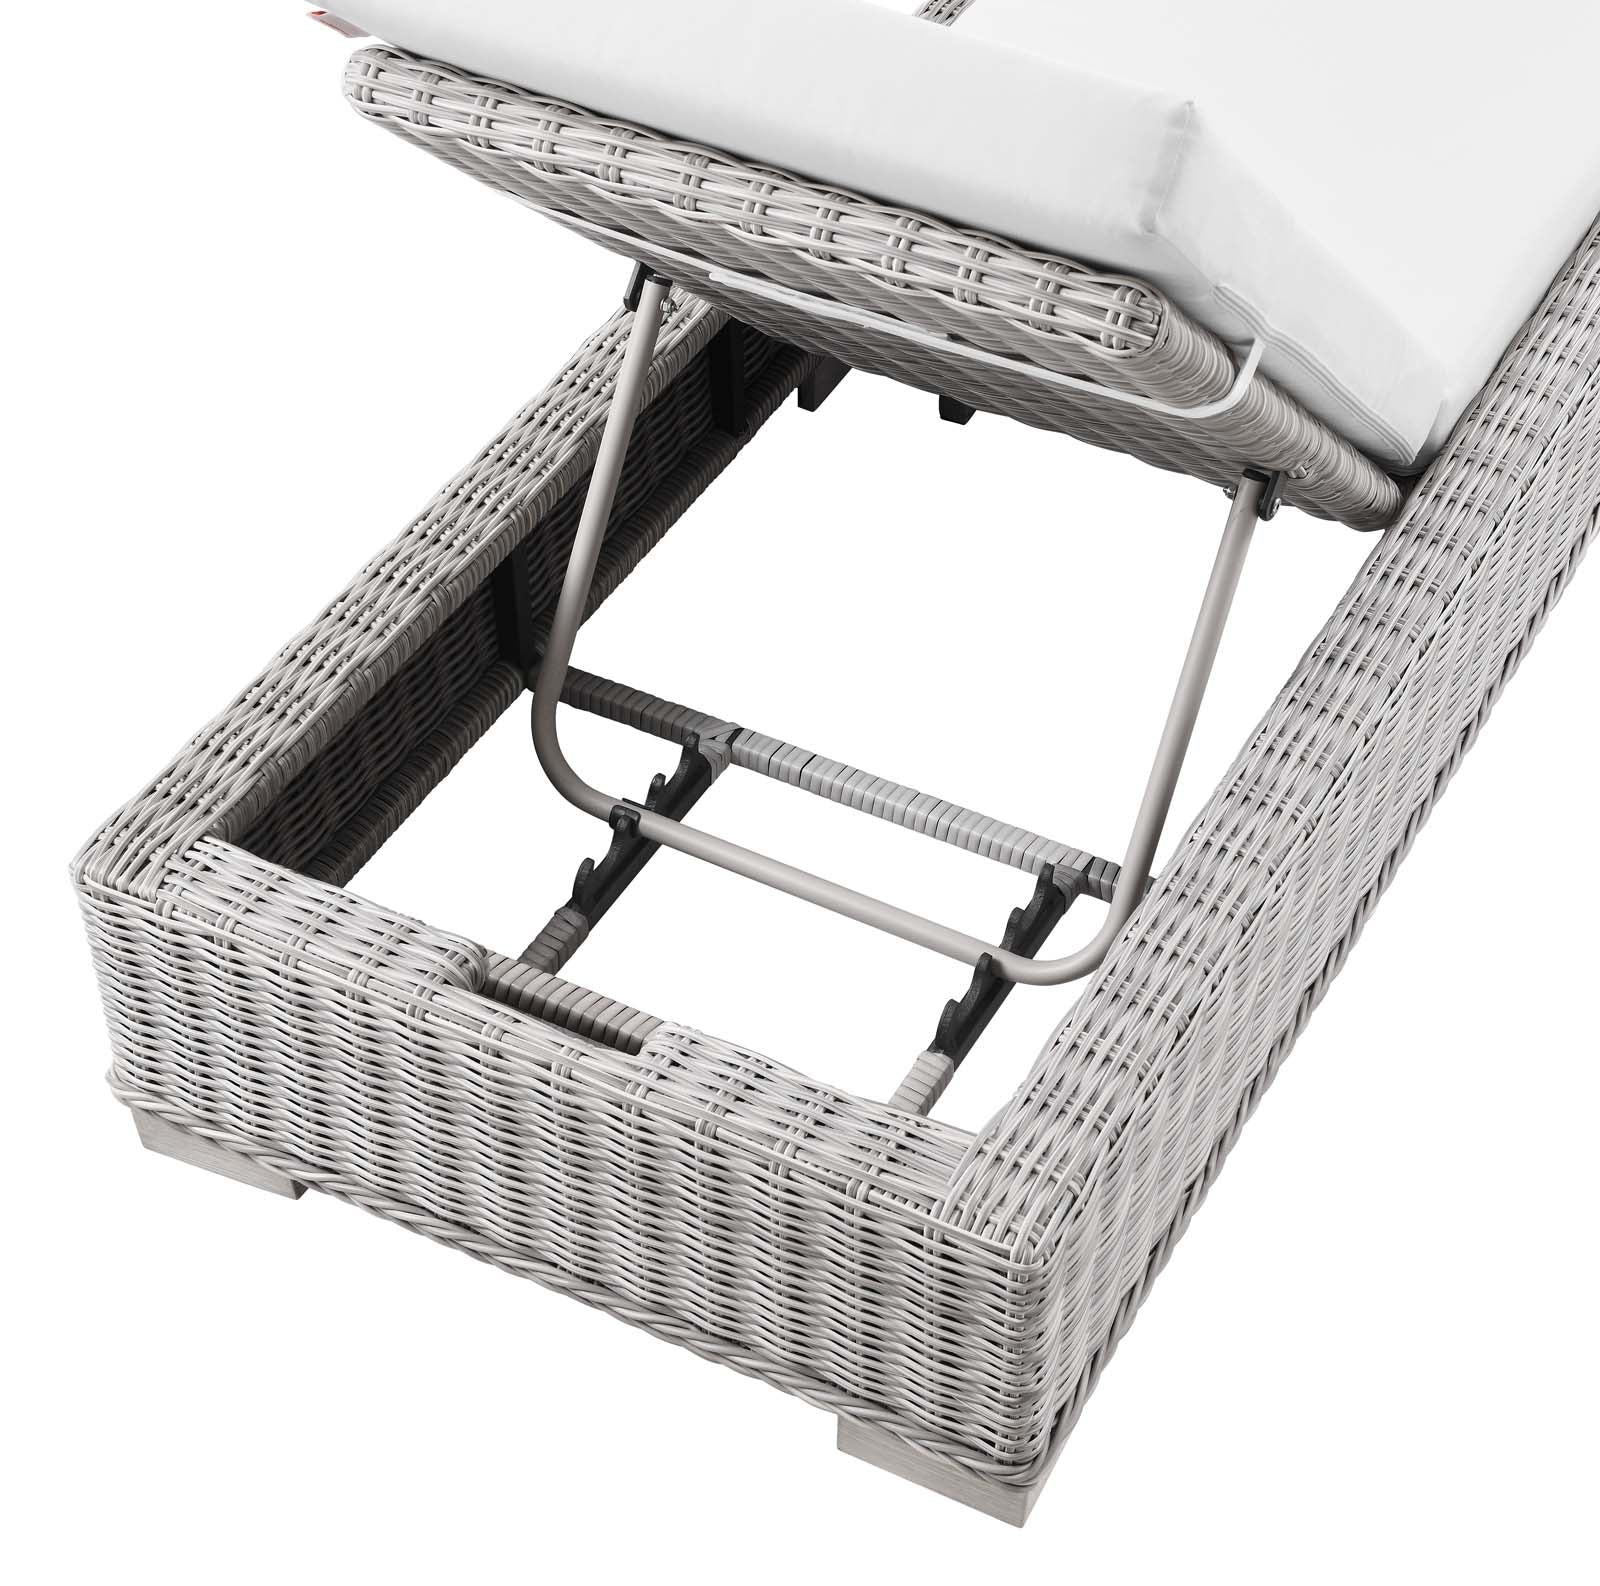 Modway Outdoor Loungers - Conway Outdoor Patio Wicker Rattan Chaise Lounge Light Gray White